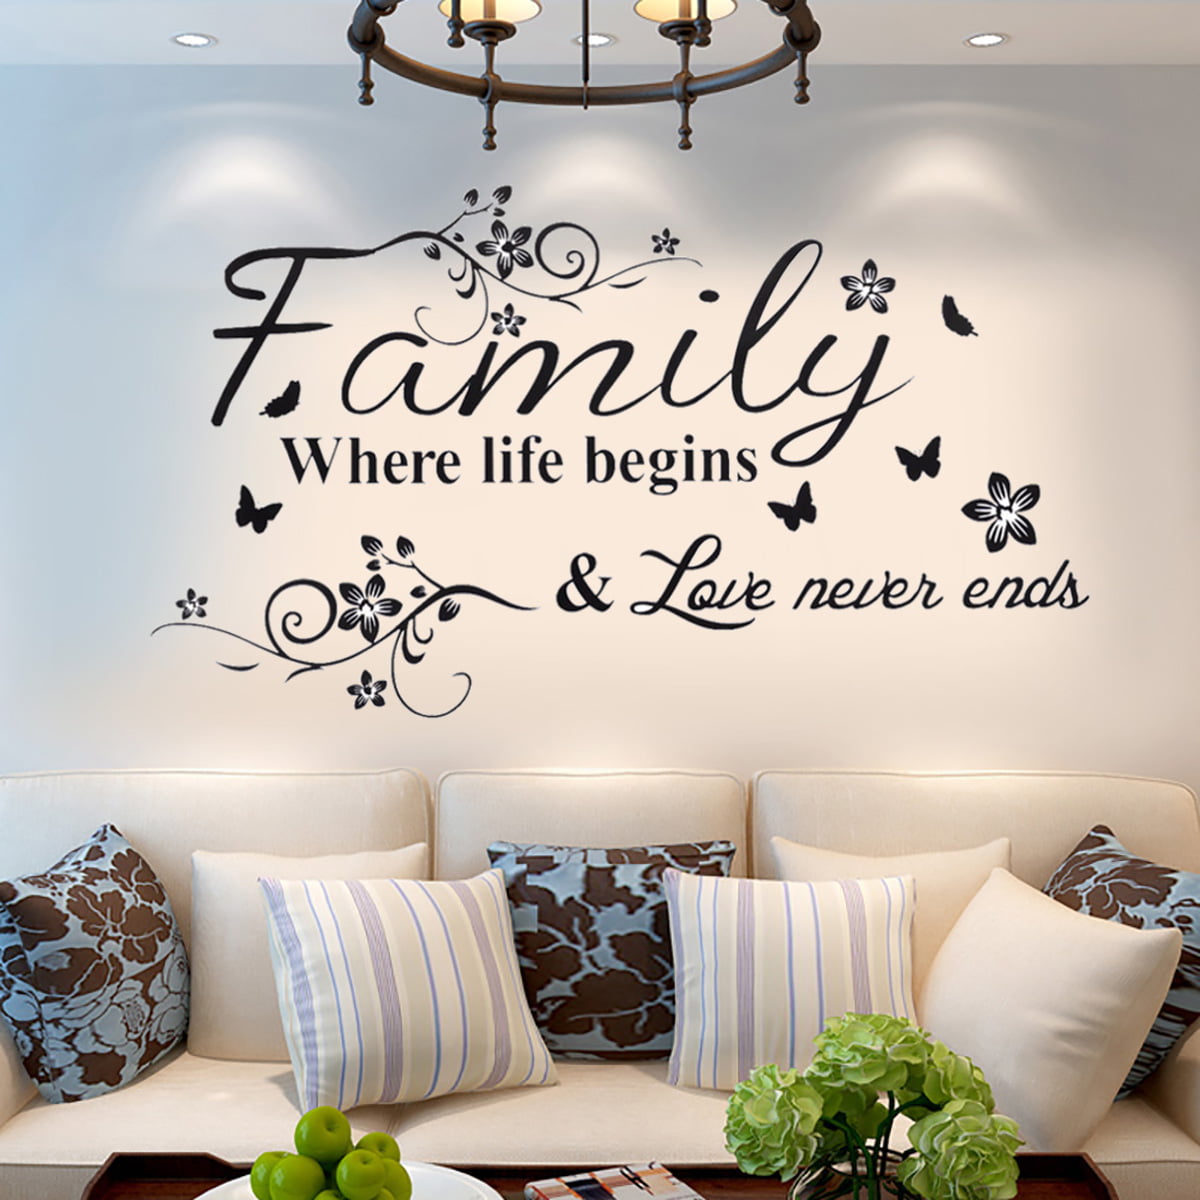 Wall Sticker Live Laugh Love Flower Butterfly Quotes Lettering Sticker Removable Vinyl Decal Art Mural Home Decor DIY Sticker 